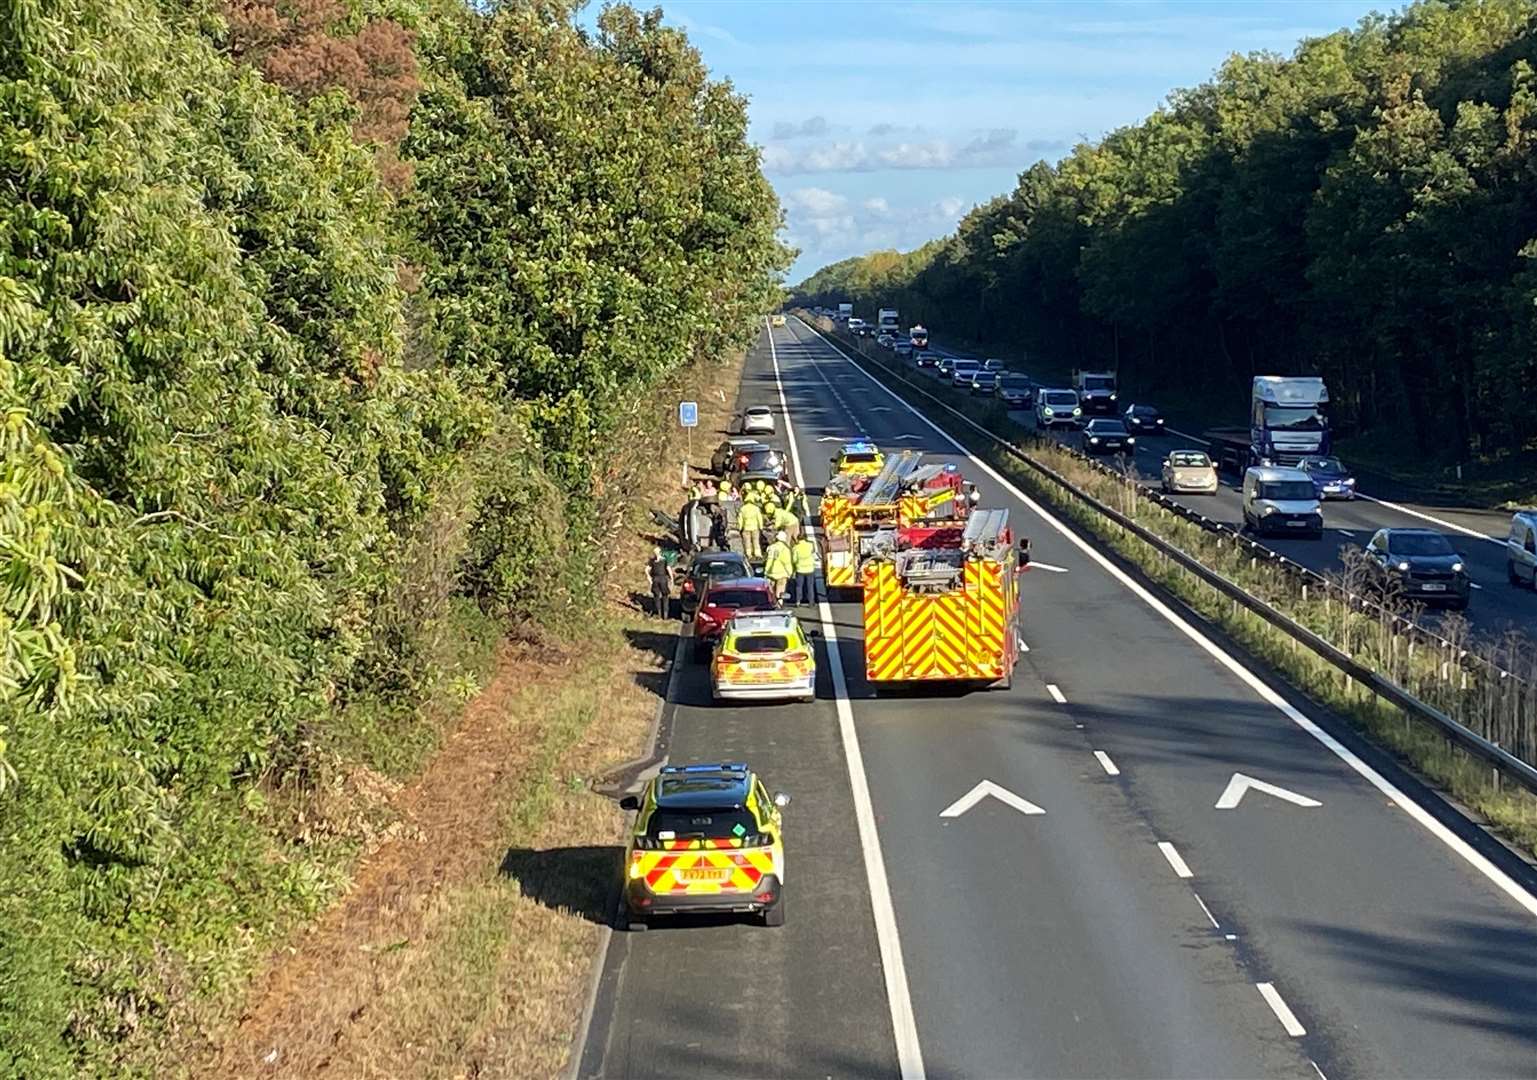 Traffic has been stopped on the M2 near Faversham after a collision left a car on its side